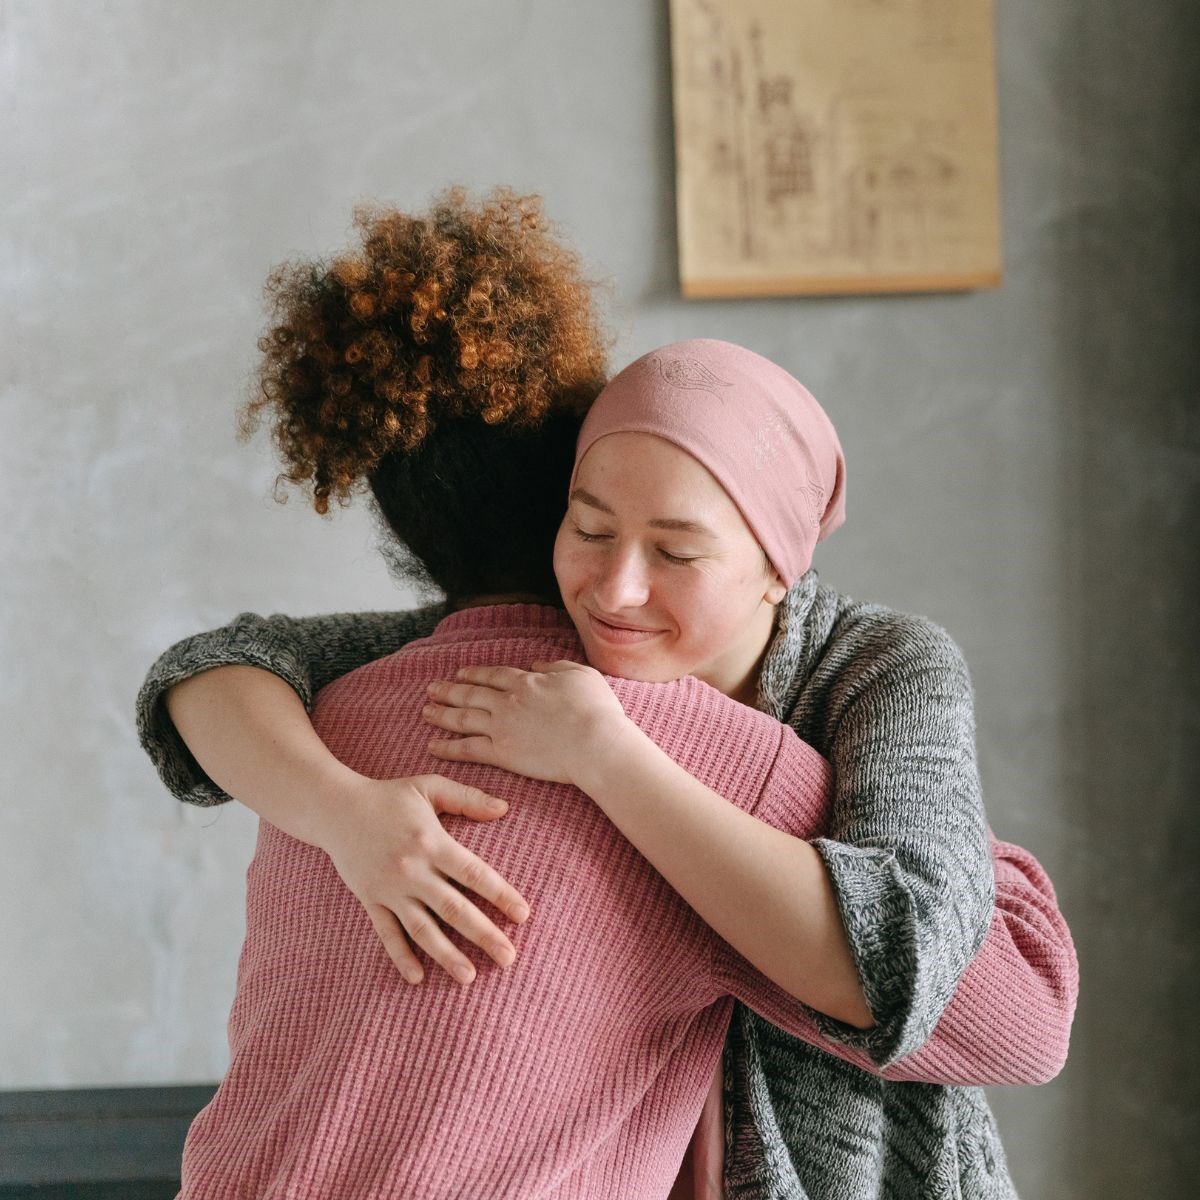 Two women embrace, the woman facing the camera is wearing a head covering and looks relieved